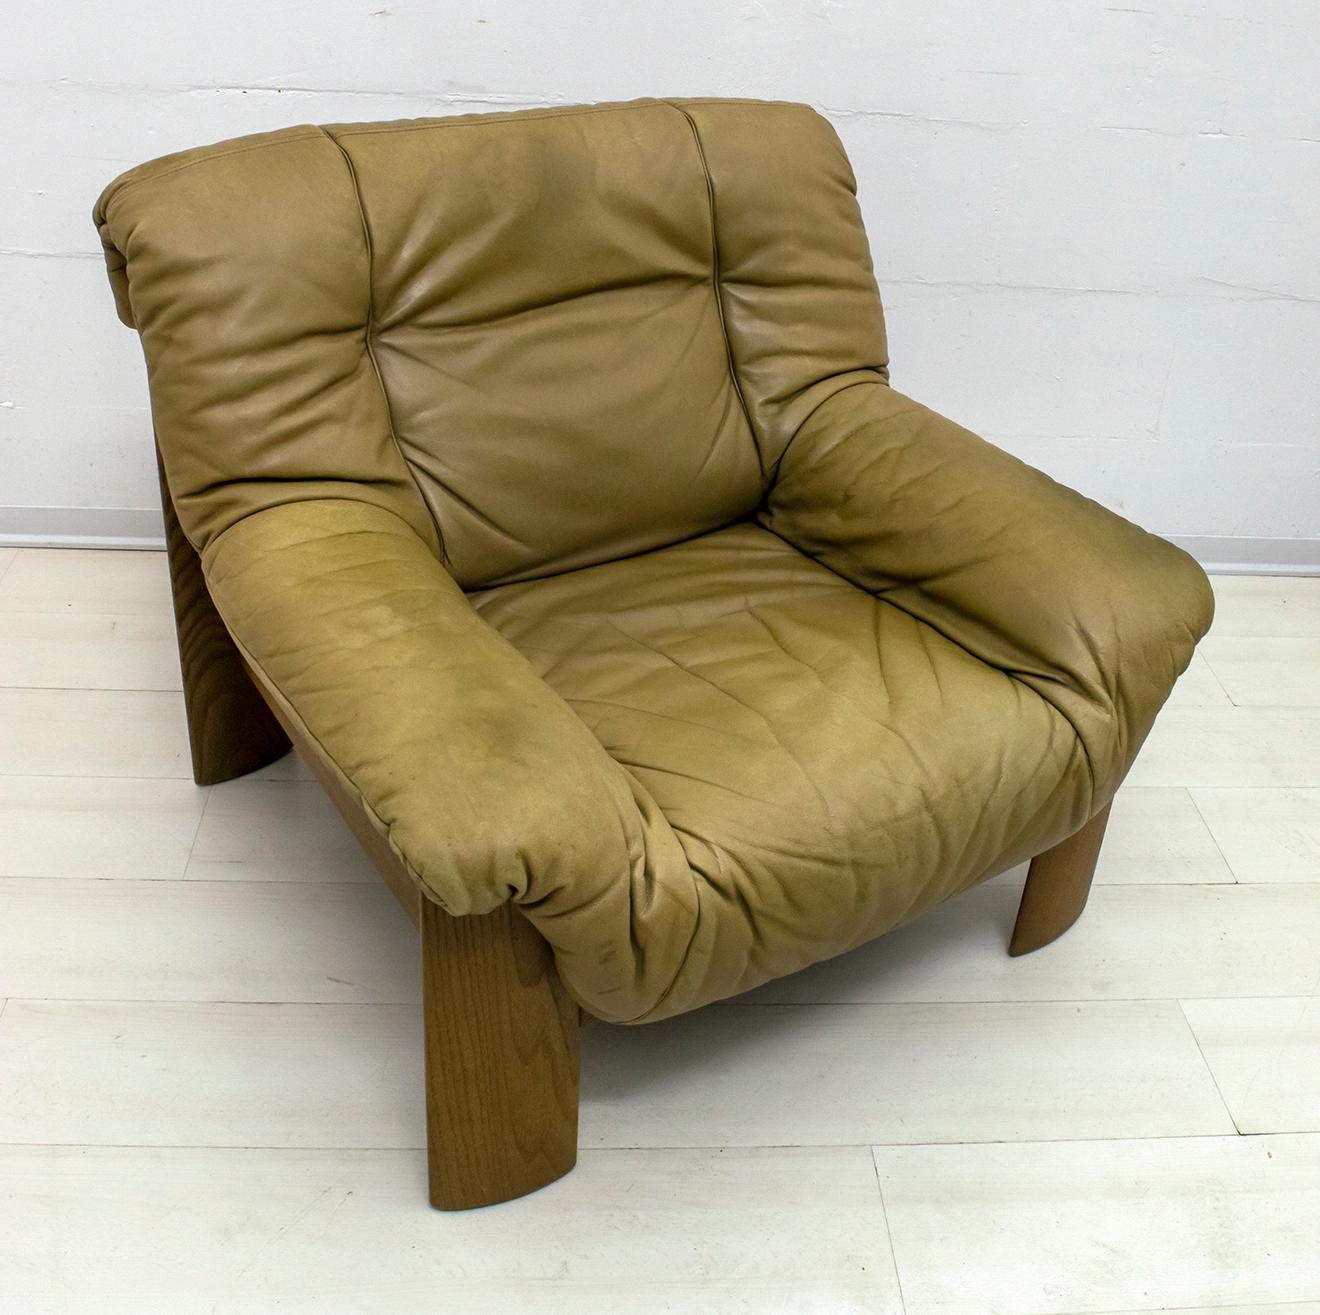 Scandinavian cognac brown leather and oak tree armchair.
Probably Danish from 1970s. Good vintage condition.
Patinated with signs of wear consistent with age and use.

